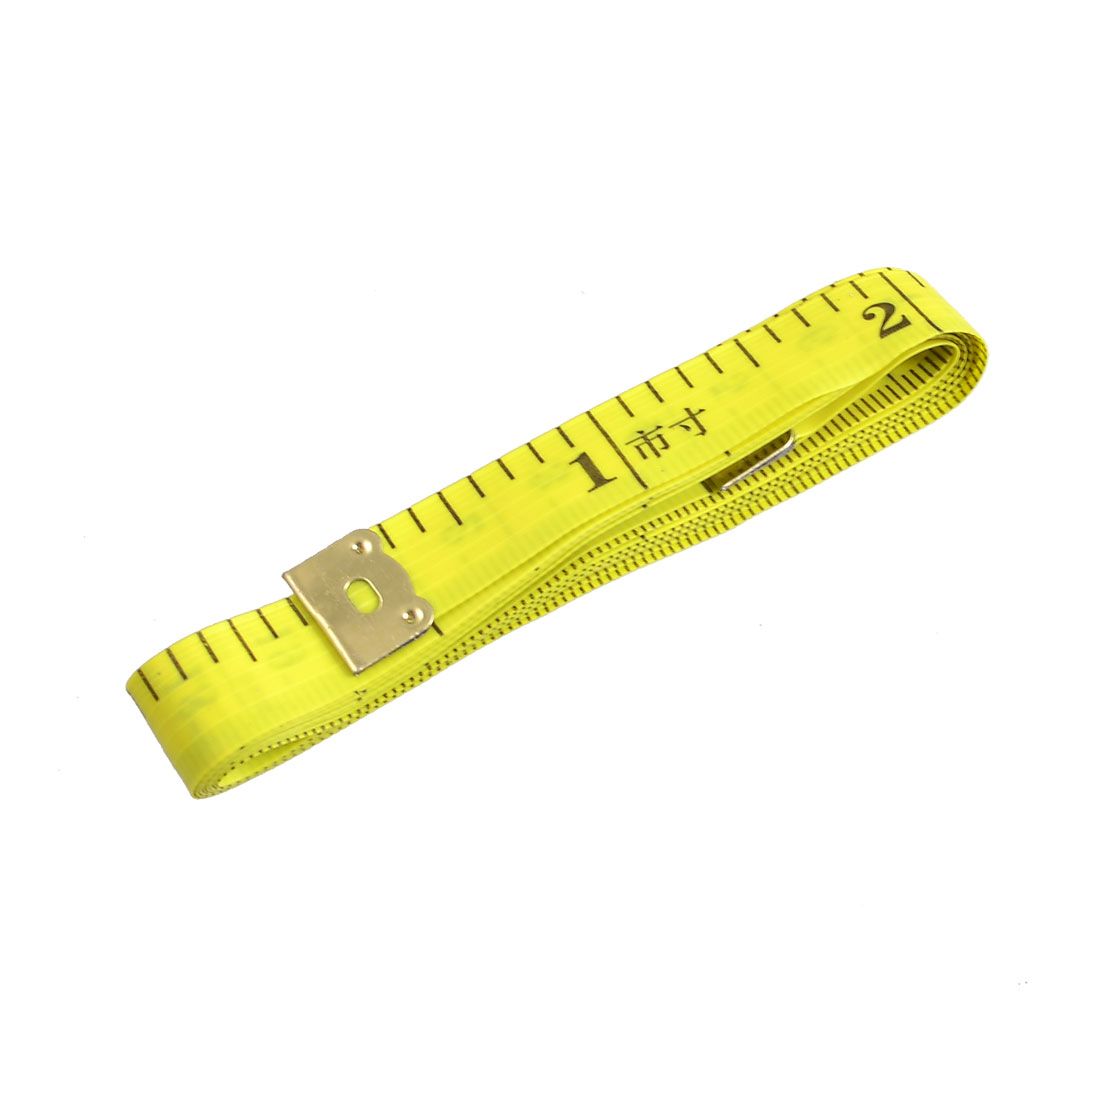 2X Yellow Soft Plastic Dual Scale Ruler Tape Measuring Tool 1 5M ...